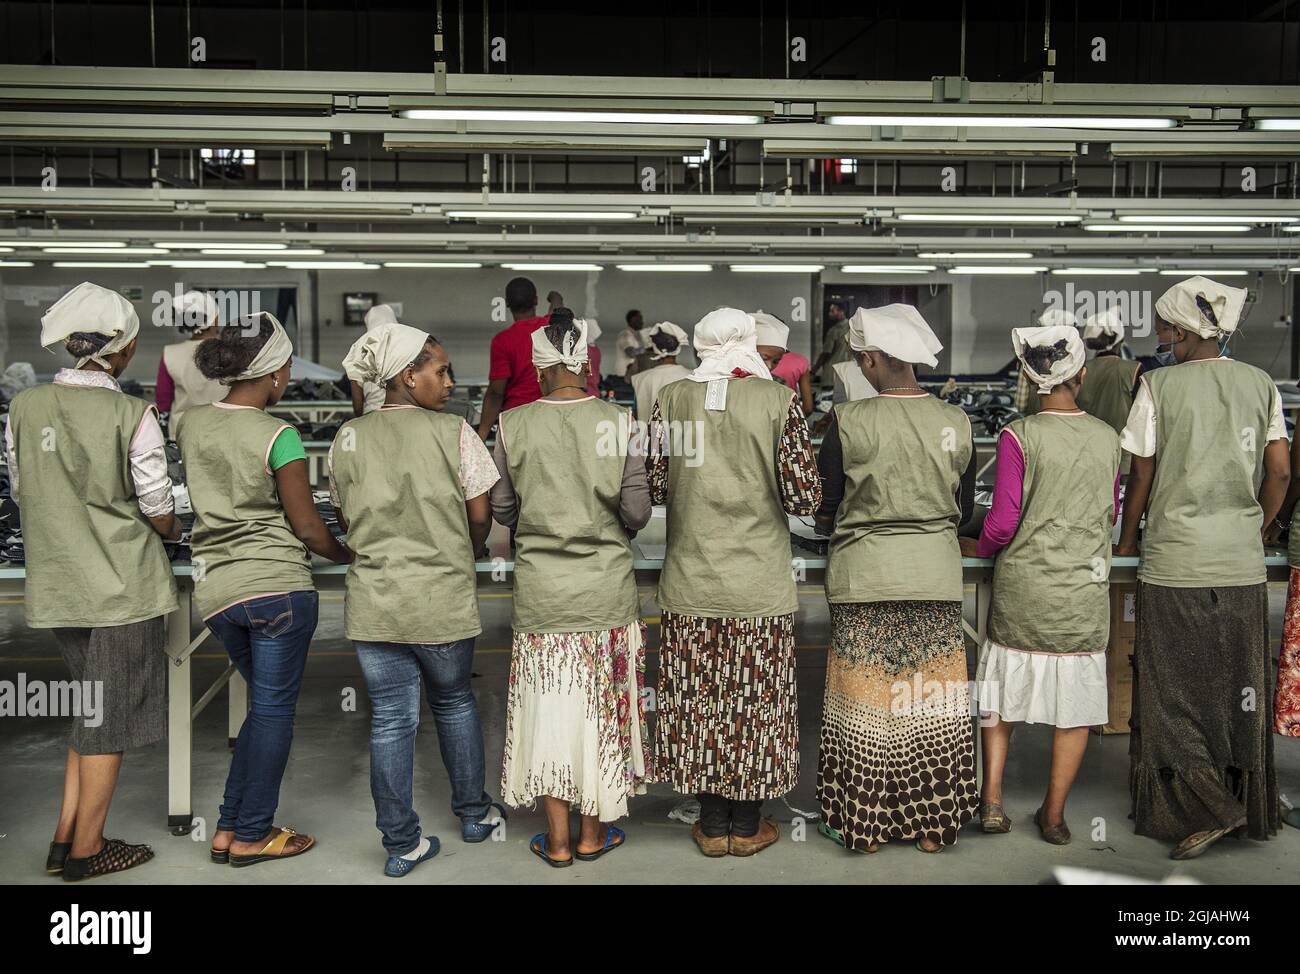 ADDIS ABEBA Workers of a textile factory in Addis Abeba, Ethiopia Foto:  Yvonne Asell / SvD / TT / Kod: 30202 industry, manufacuring, manufacuring,  trade, woman Stock Photo - Alamy